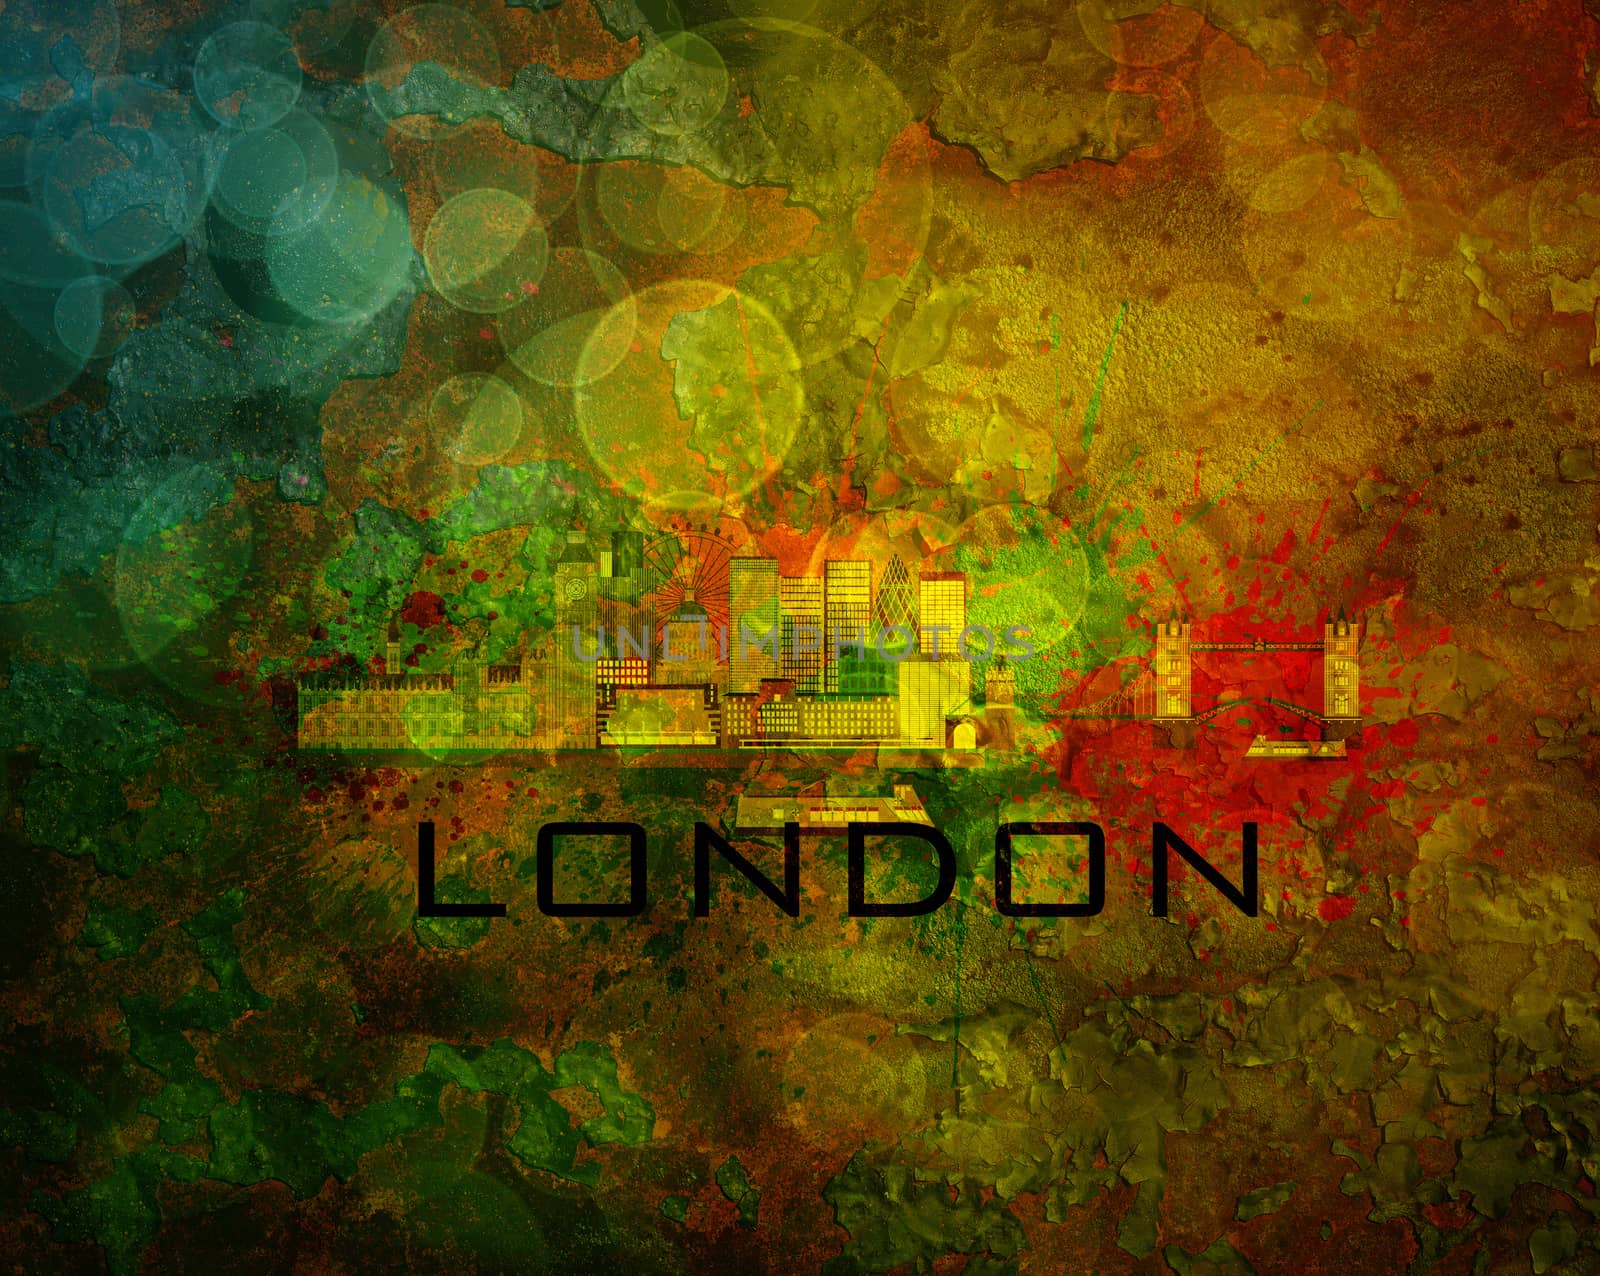 London Great Britain City Skyline with Paint Splatter Abstract on Grunge Texture Background Color Illustration